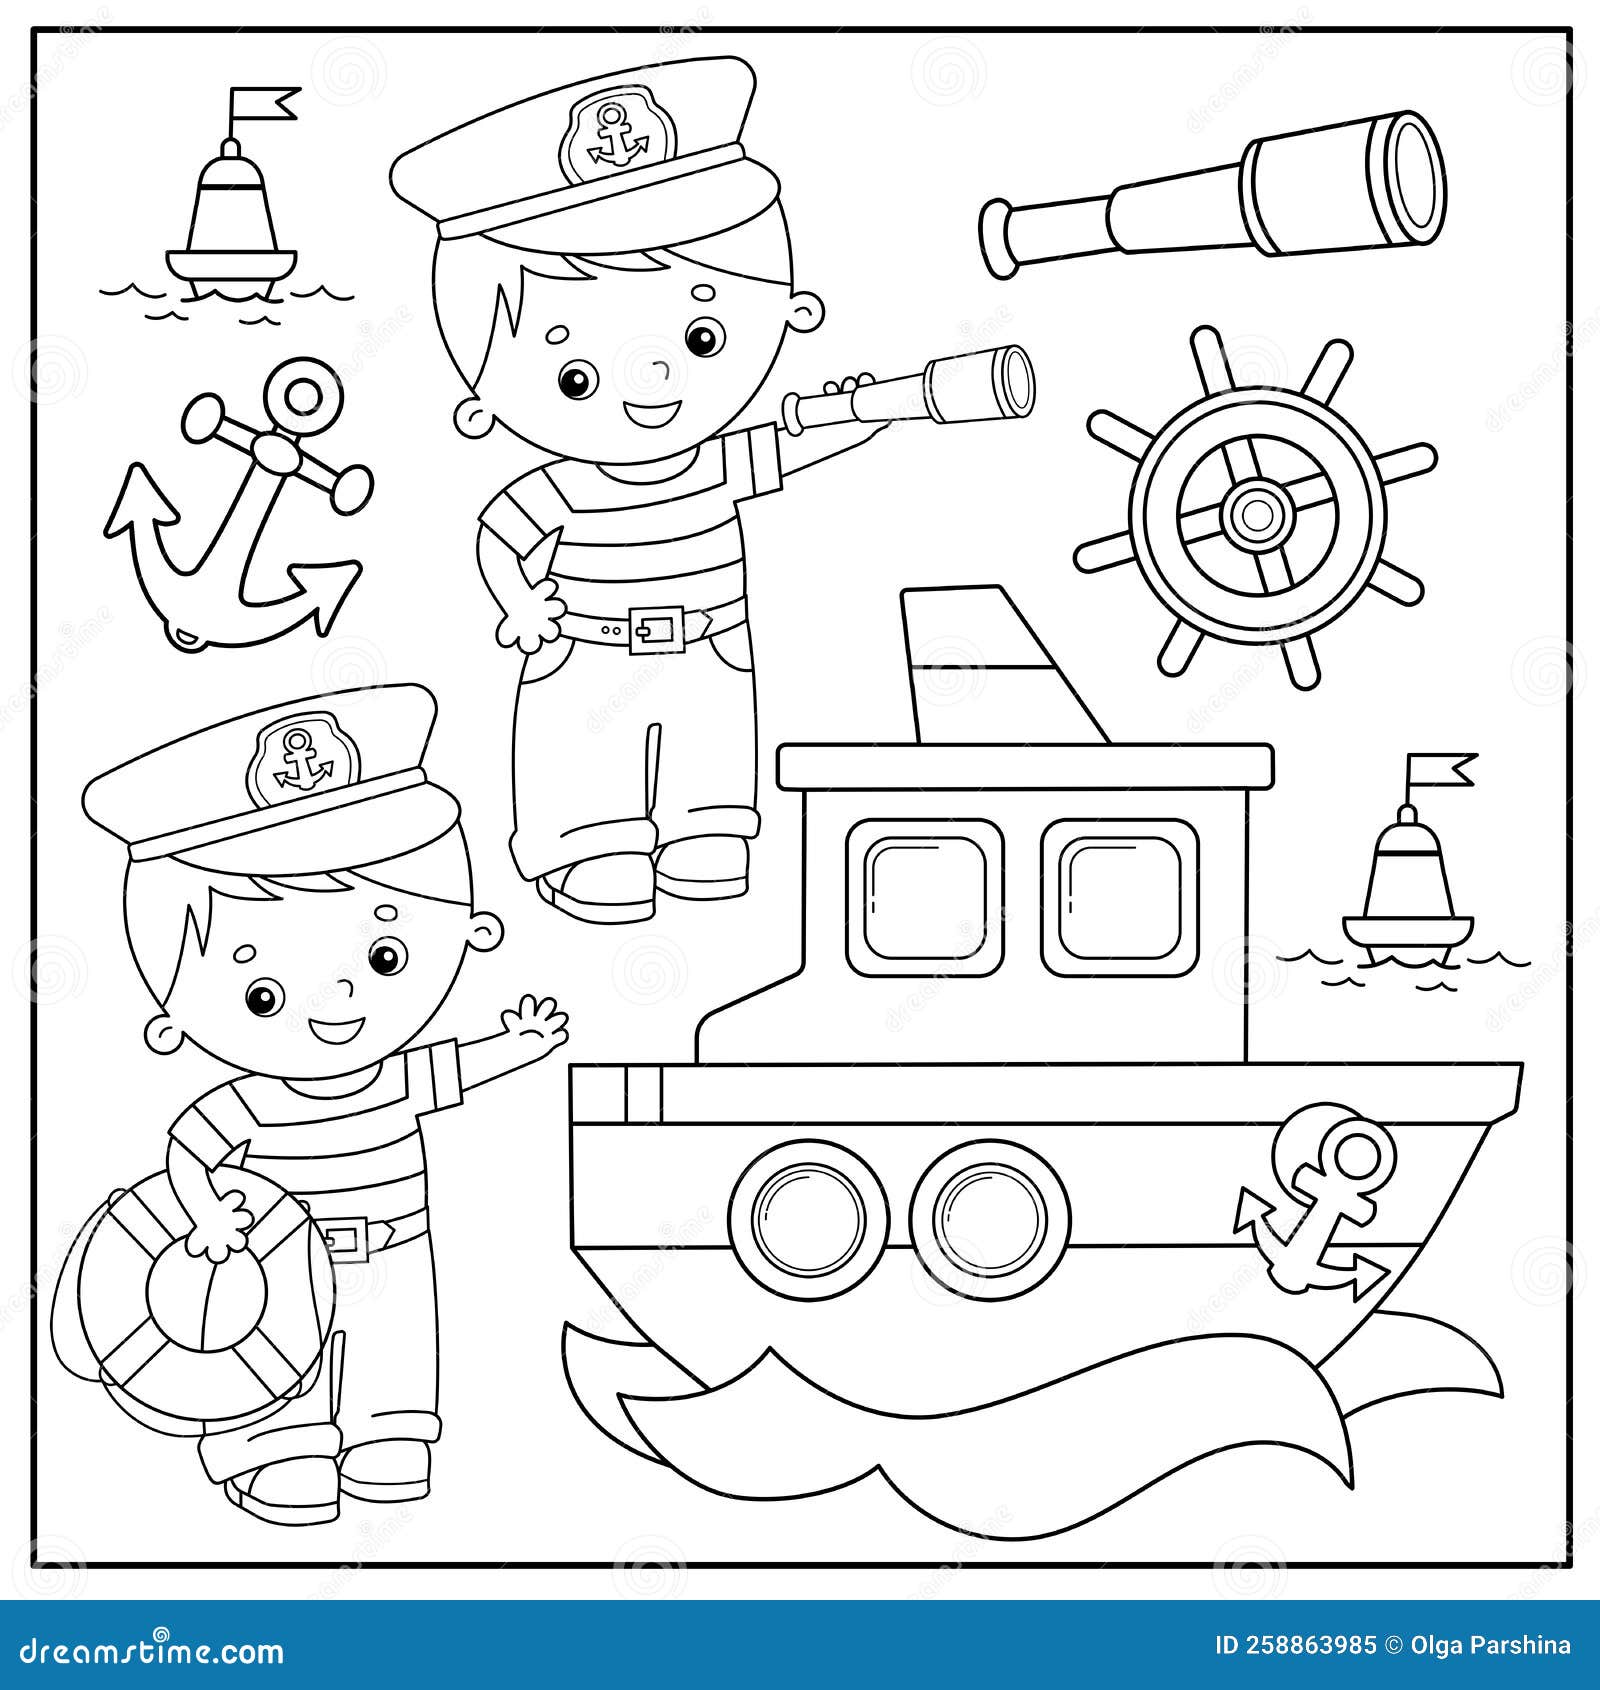 cartoon ship or steamer. sailors or seamen with spyglass and lifebuoy. images of sea transport for children. profession. coloring